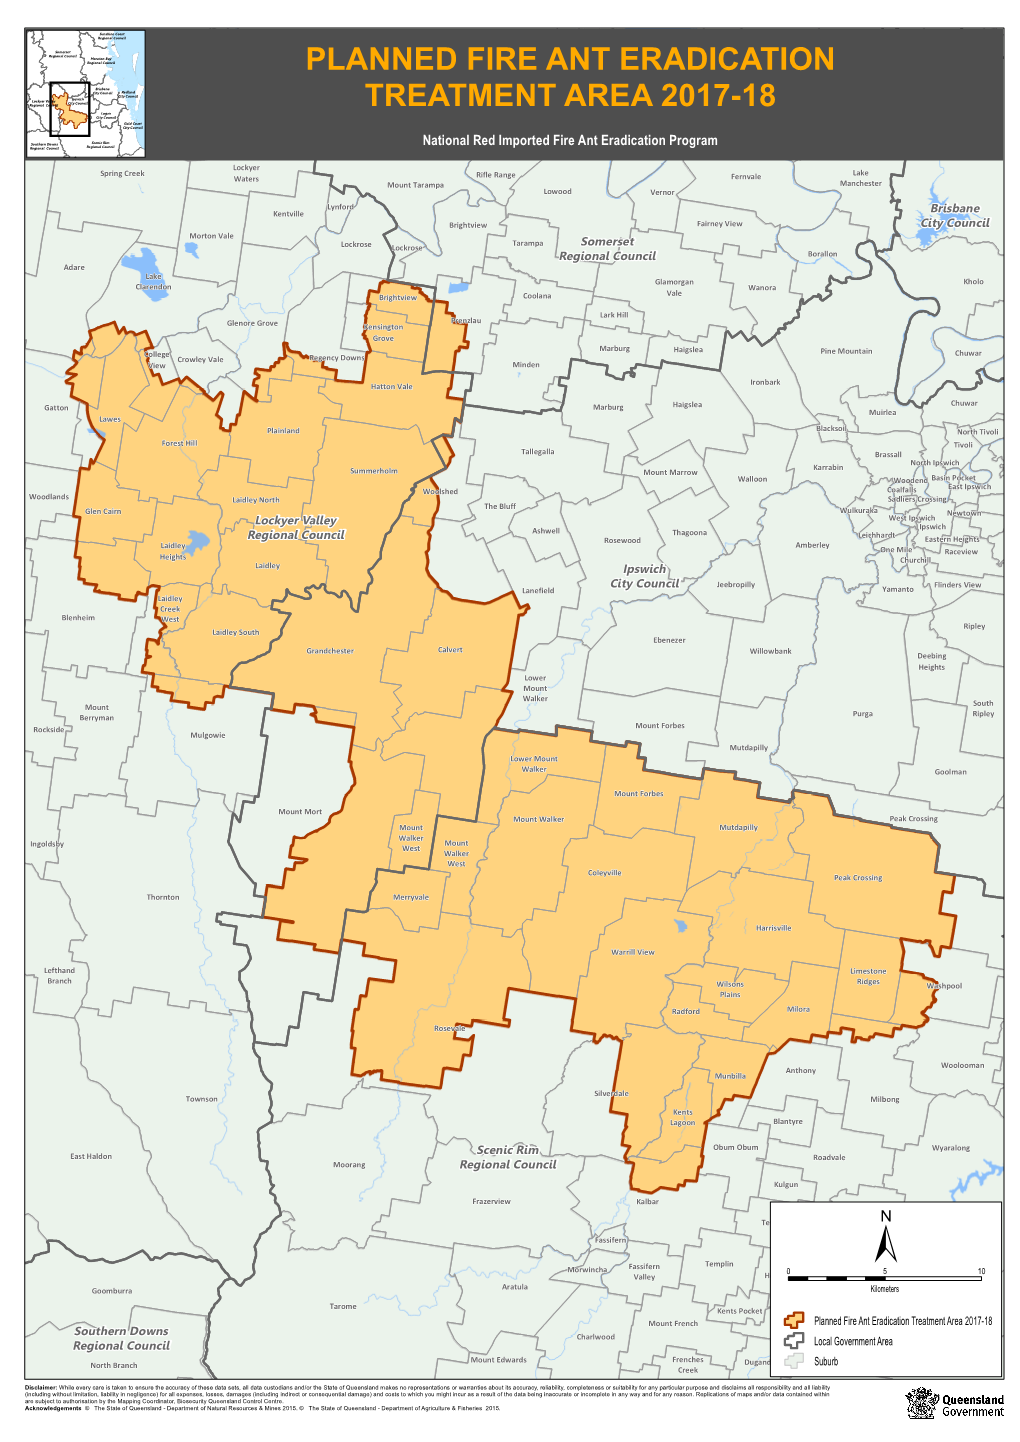 Planned Fire Ant Eradication Treatment Area 2017-18